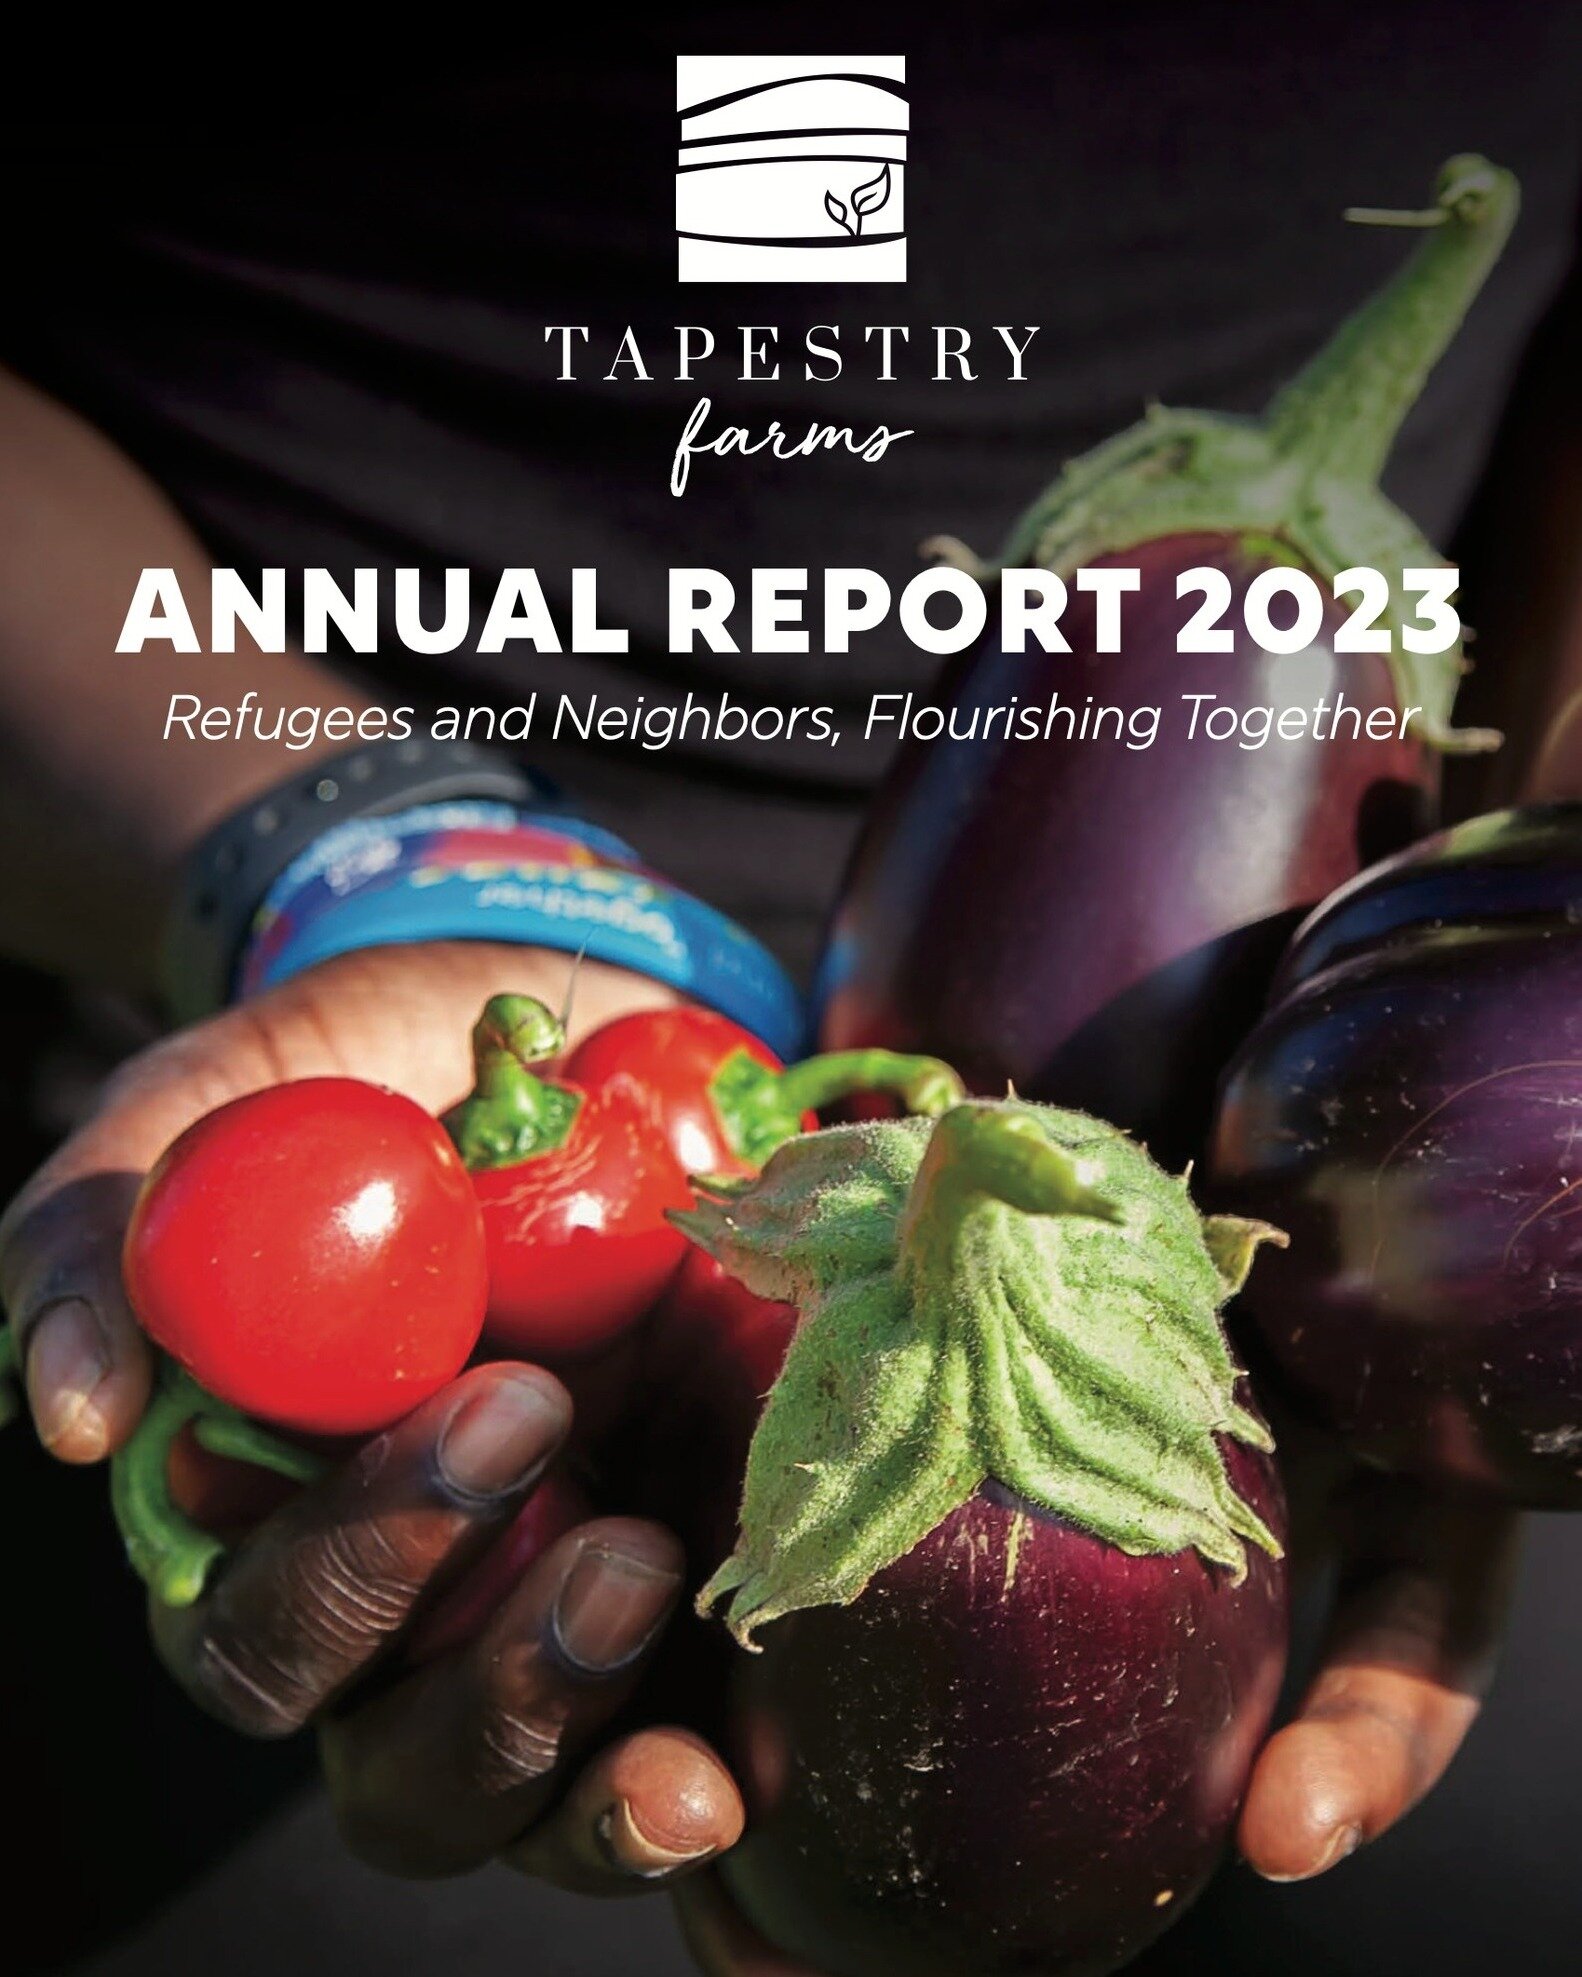 Settle in for some #weekend #reading with our 2023 Annual Report! The document is a beautiful celebration of how&mdash;together with you&mdash;we were able to provide a welcome to displaced individuals and families from across the globe. Love numbers